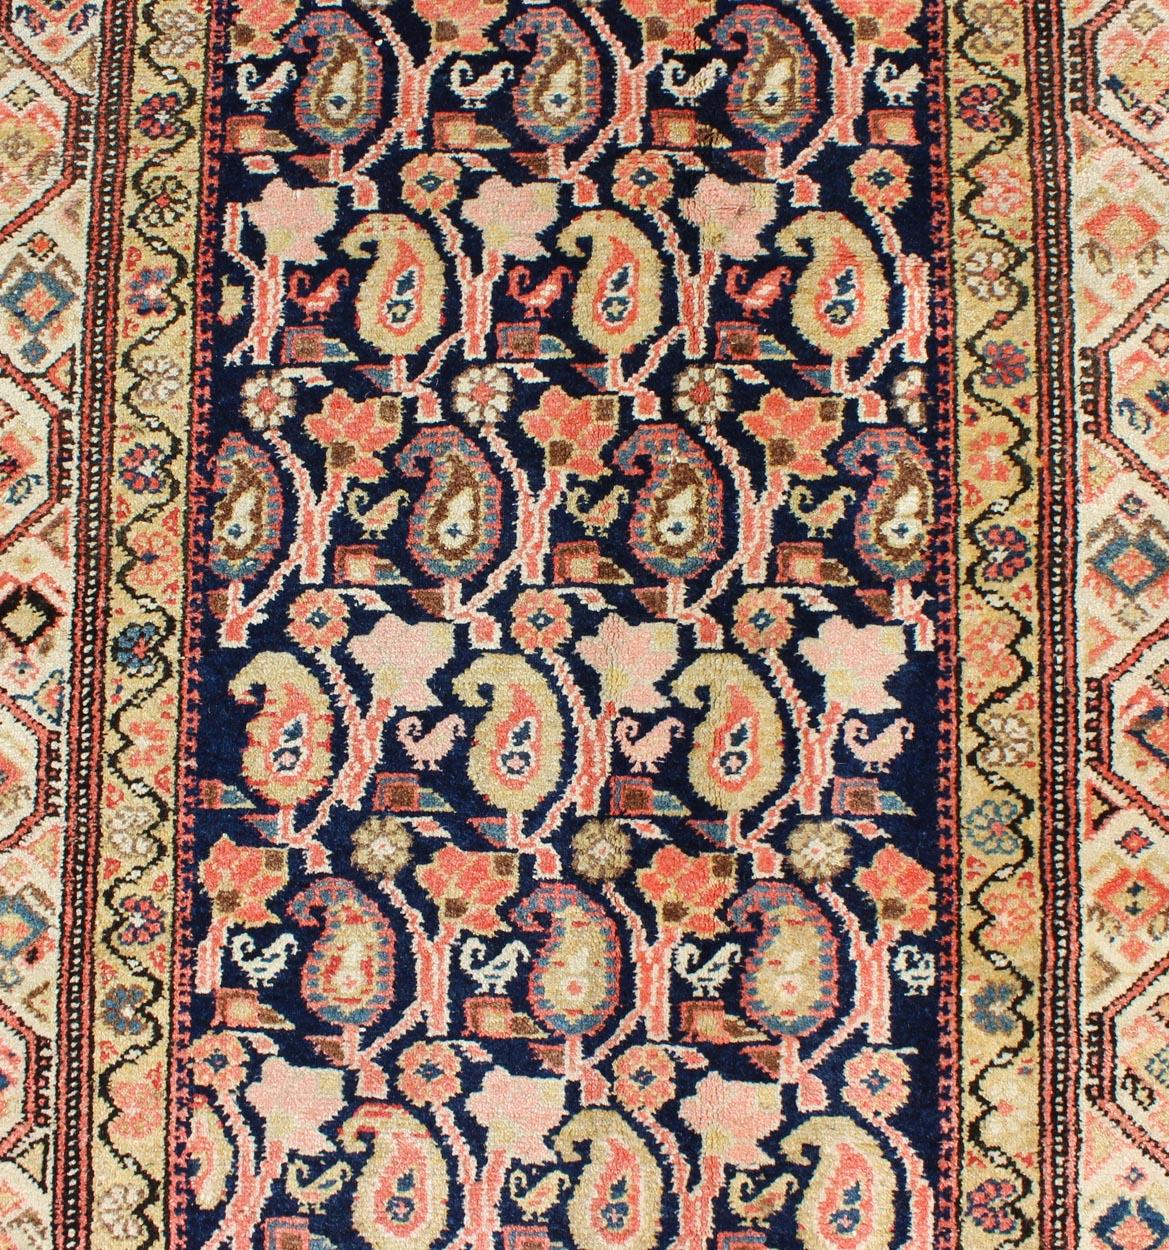 Paisley Design Antique Persian Malayer Runner in Dark and Light Tones For Sale 4